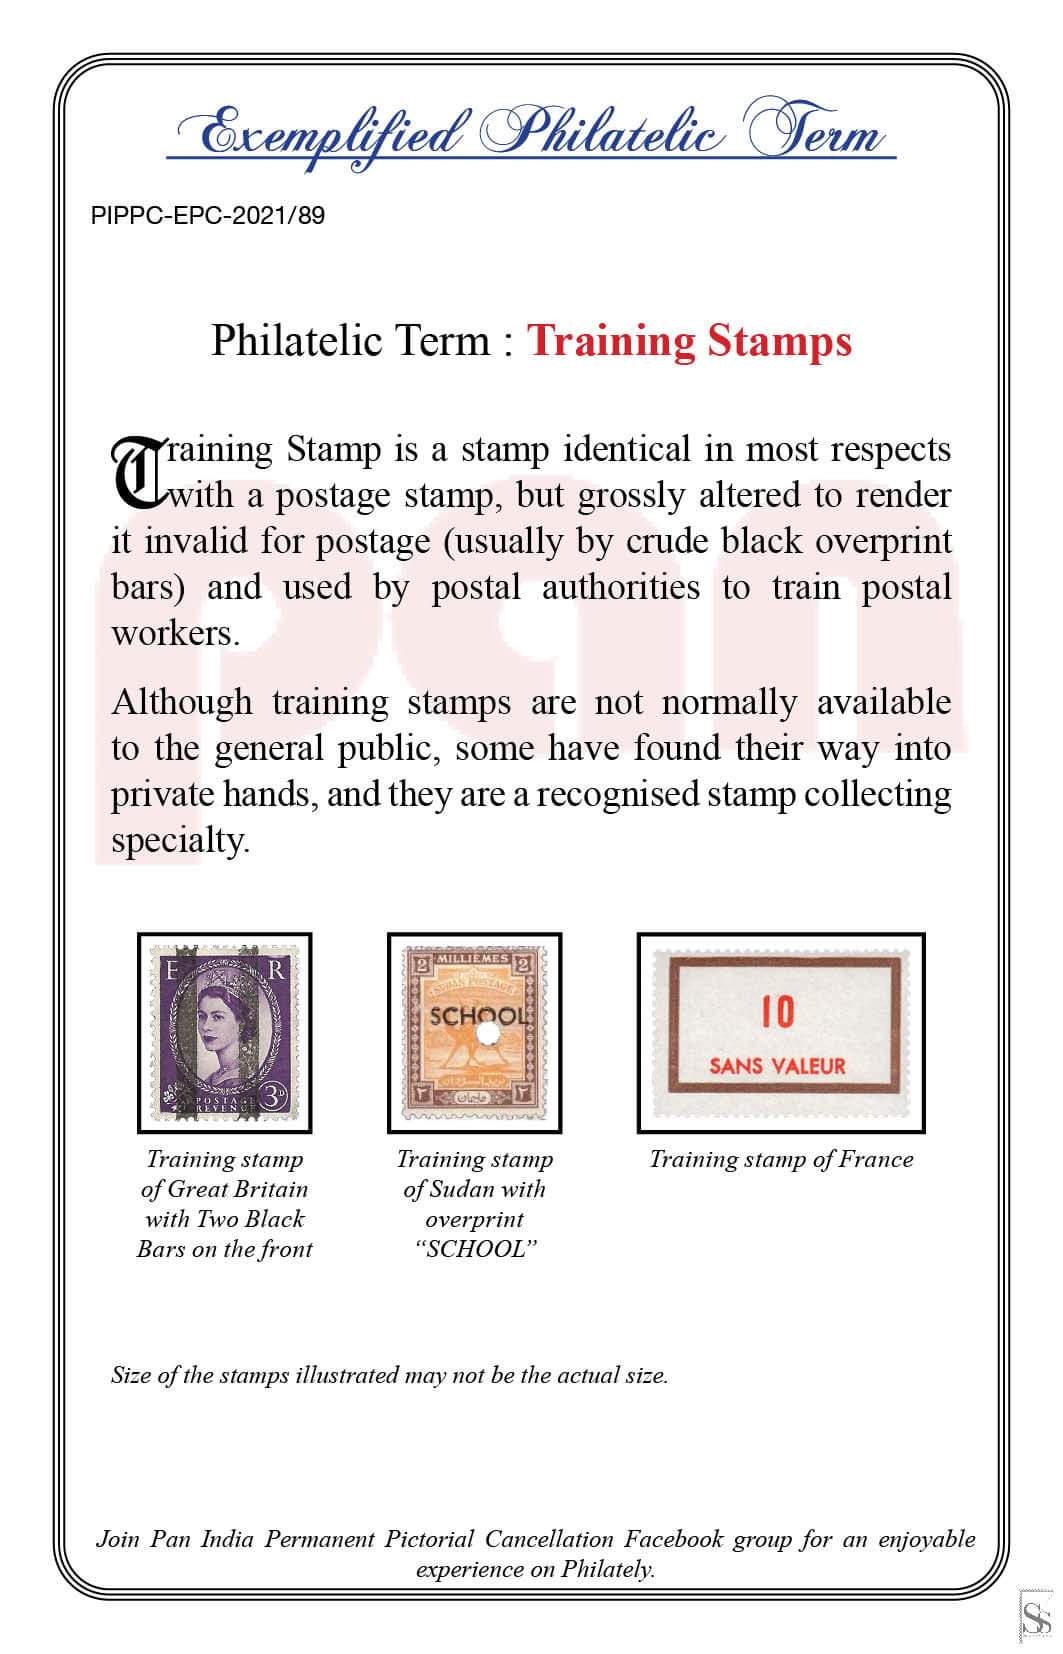 89. Today's exemplified philatelic term-Training Stamps